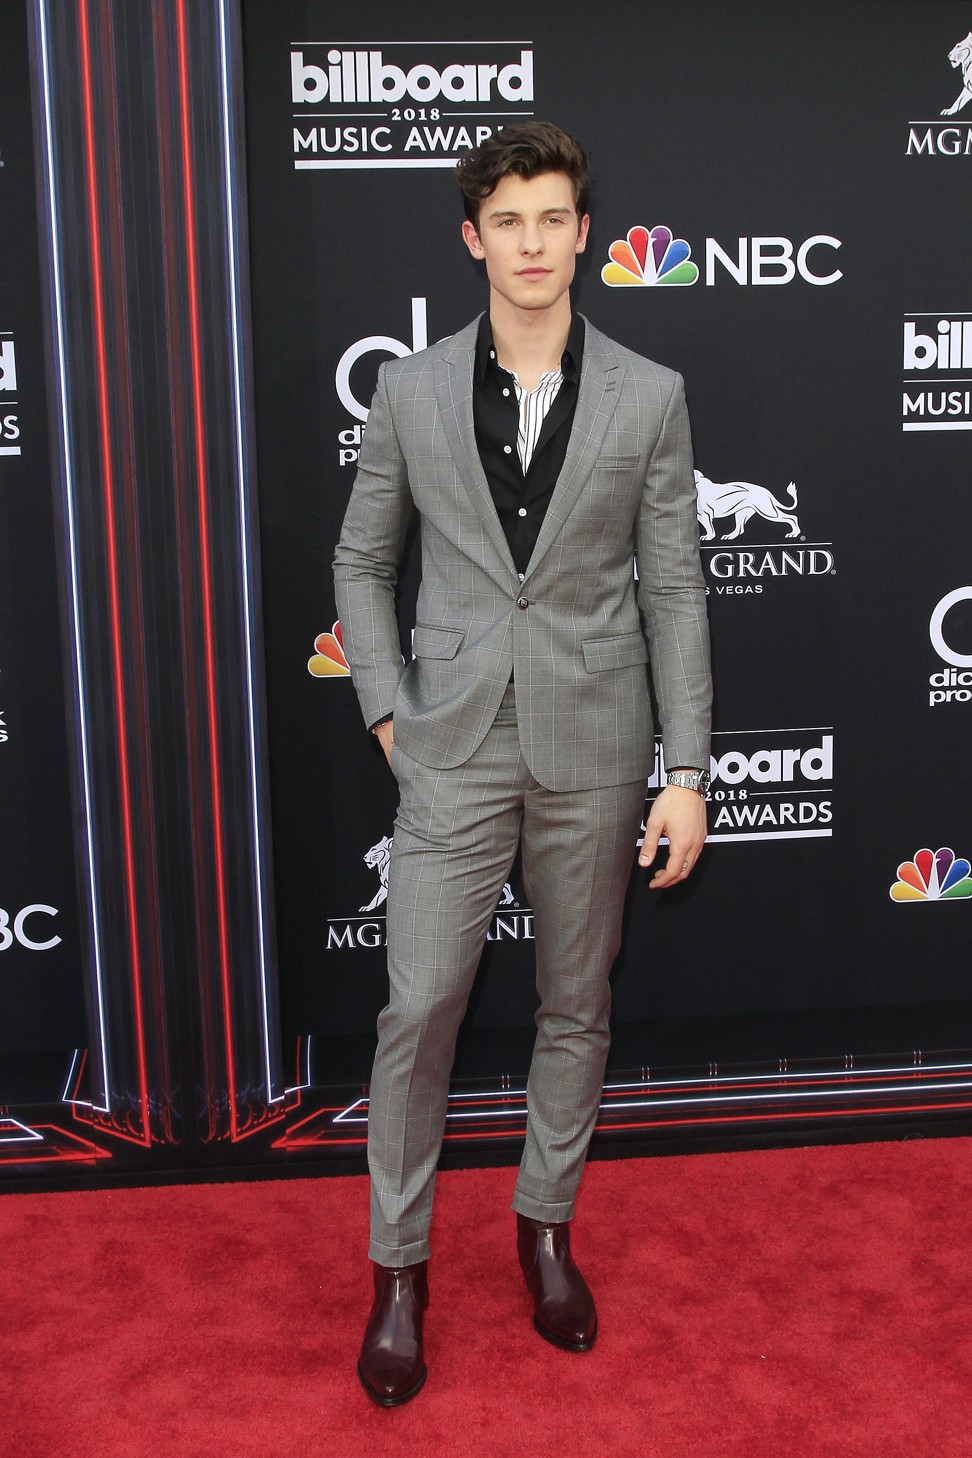 Shawn Mendes on the red carpet at the 2018 Billboard Music Awards. Finalists were selected based on US year-end chart performance, sales, number of downloads and total airplay. Photo: EPA/Nina Prommer